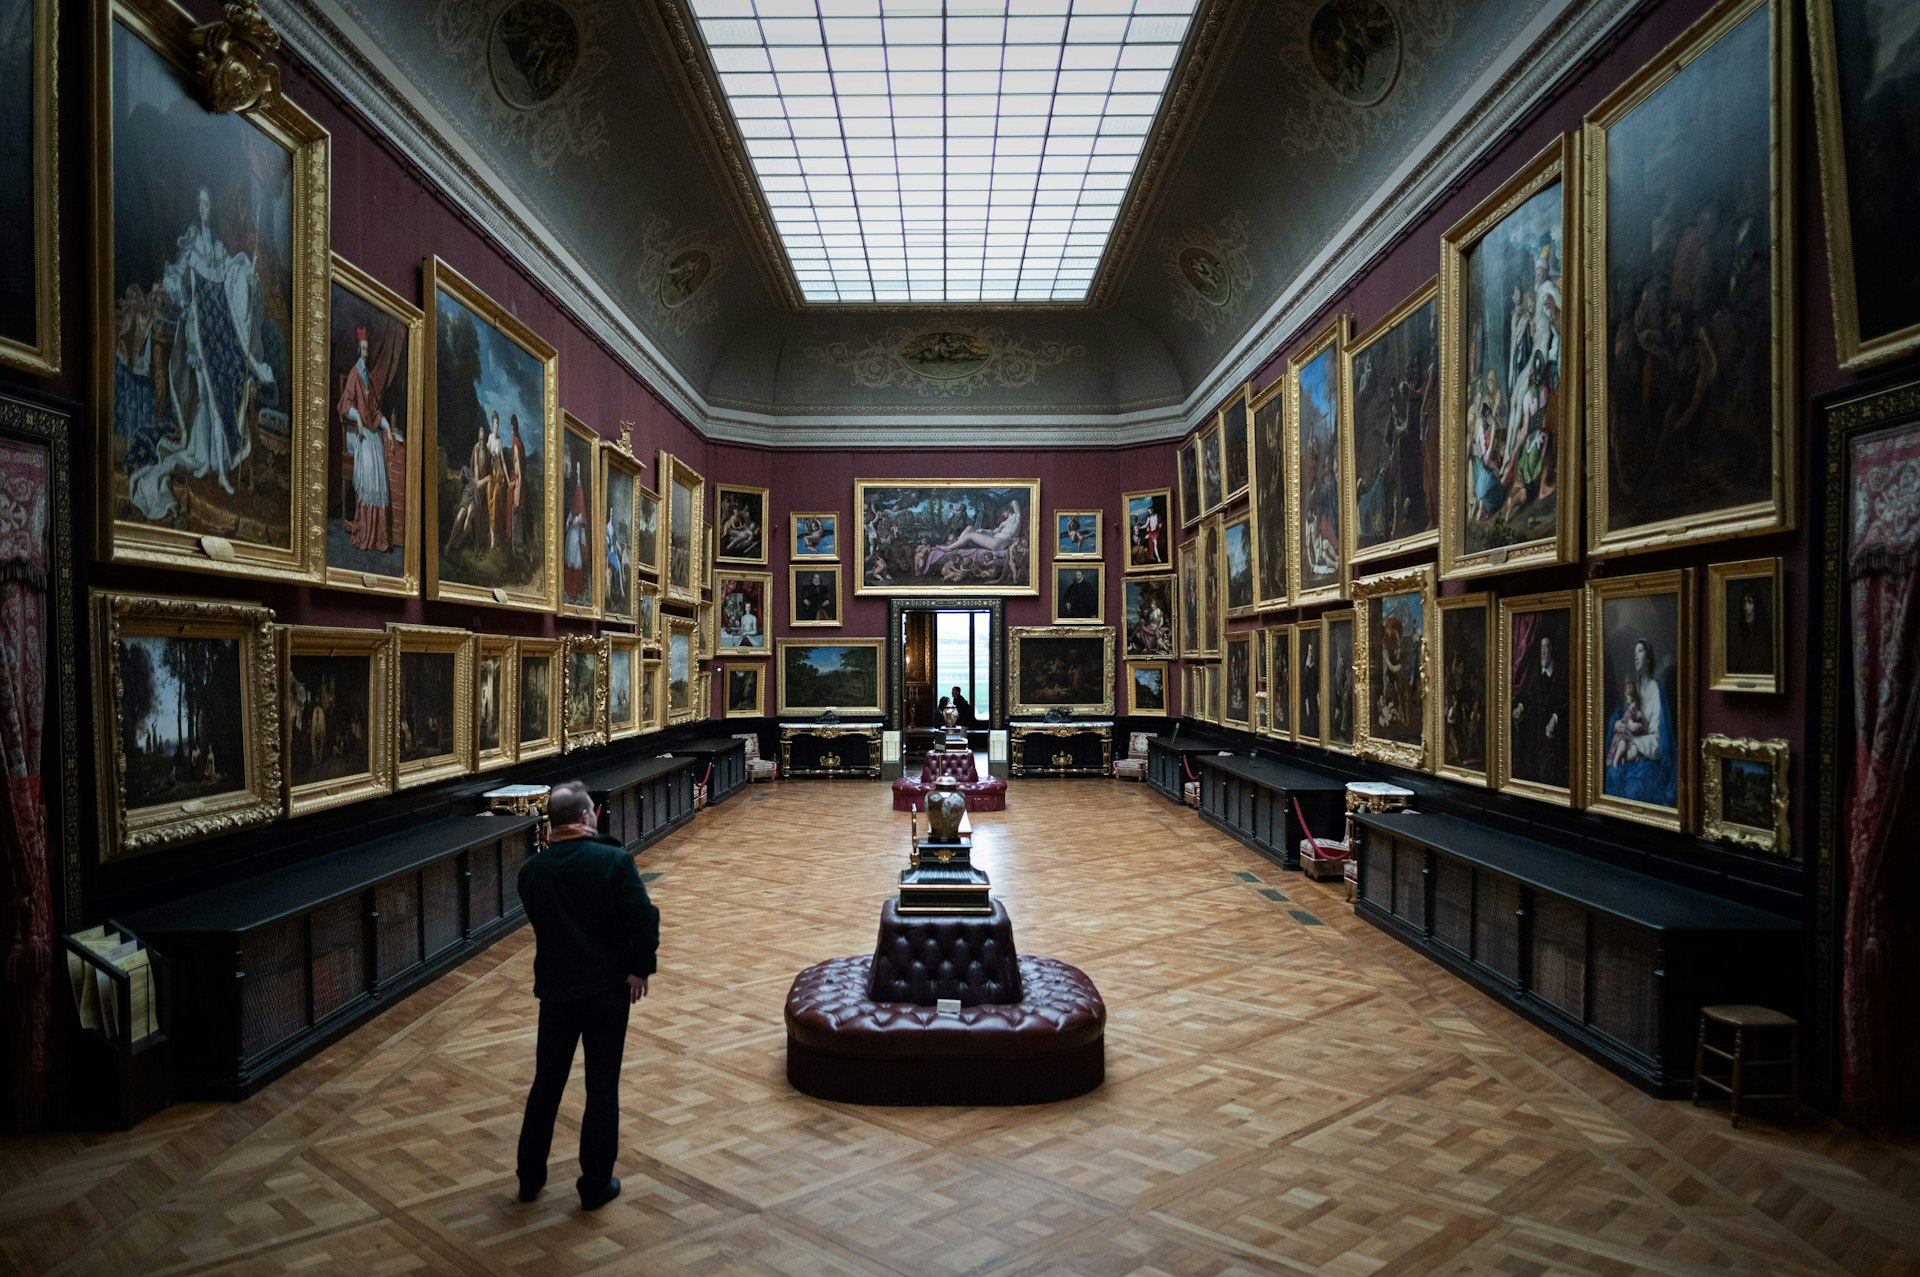 A visitor looks at paintings at the Château of Chantilly, Chantilly, Oise